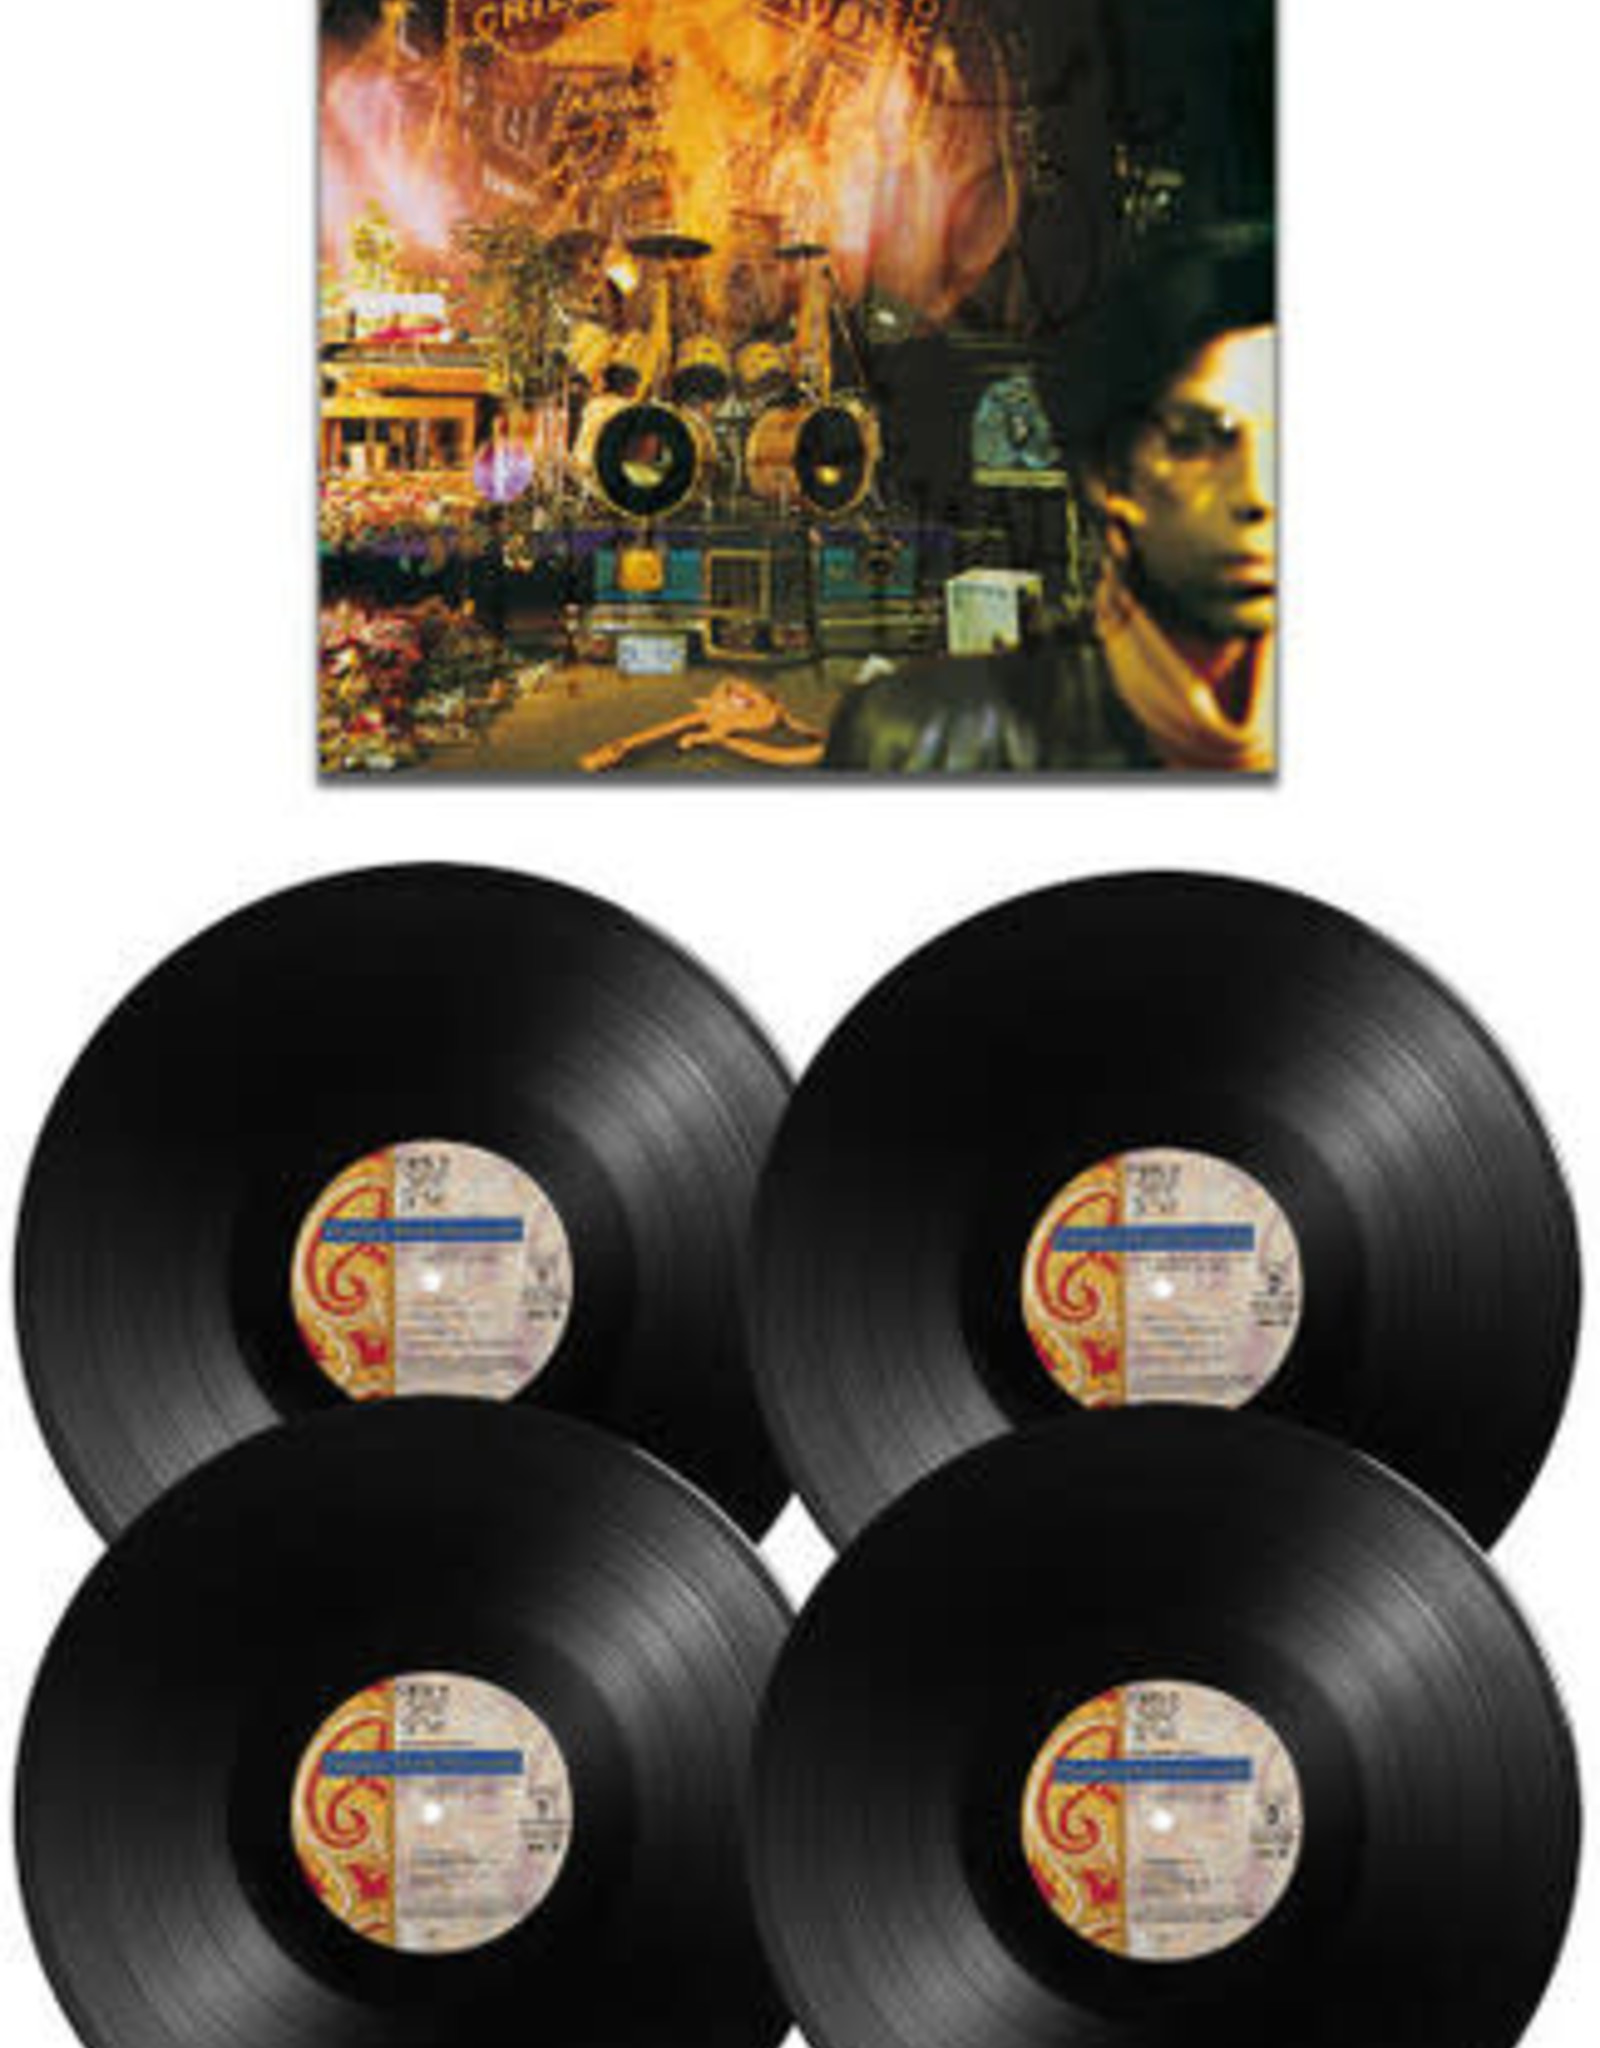 Prince - Sign 'O The Times 4LP Deluxe